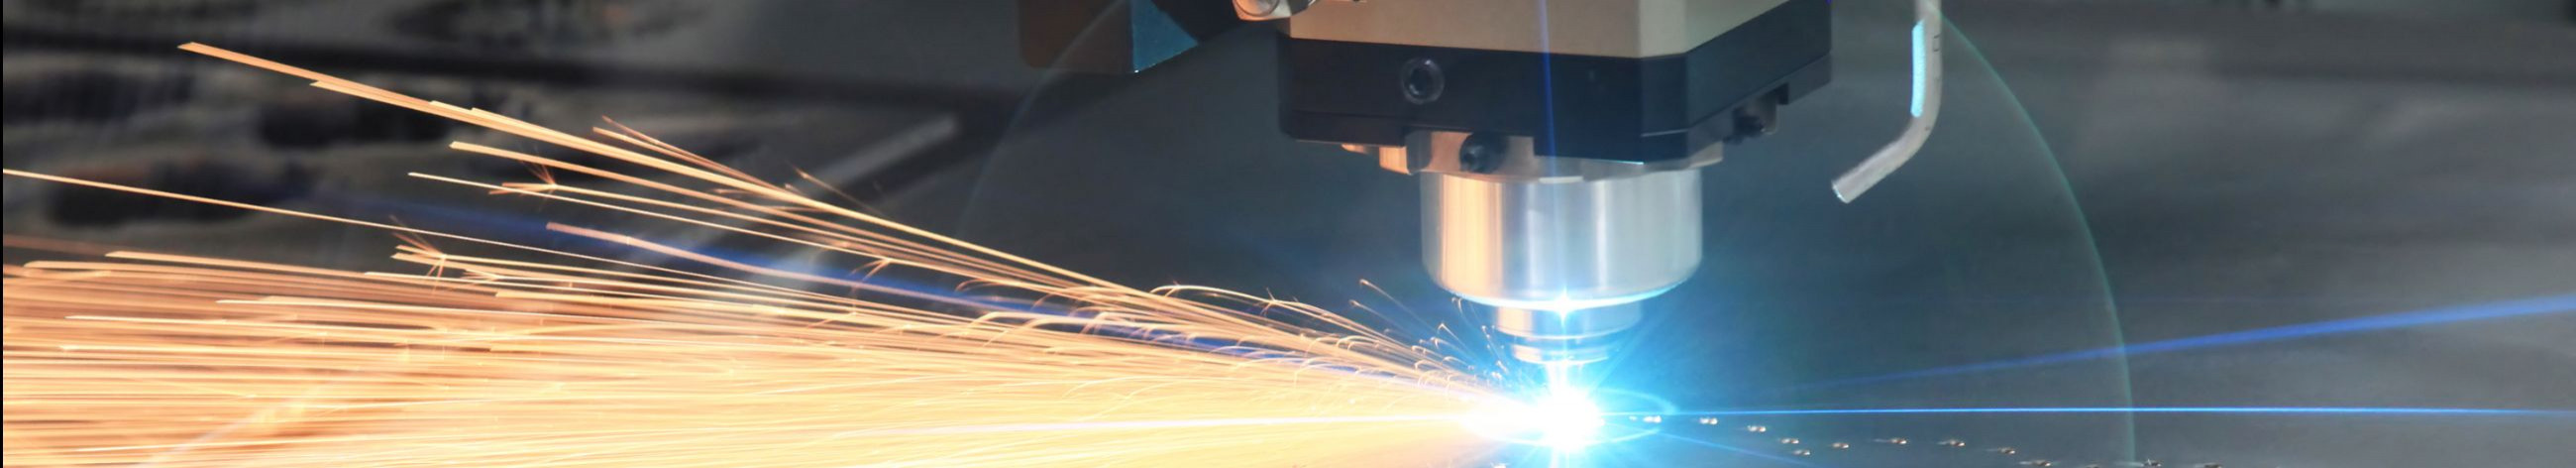 laser equipment, laser cutting, bending, Welding, Follow-up, Manufacture of laser machines, Metal industry partner, laser cutting services, Stainless steel laser cutting, Metal bending